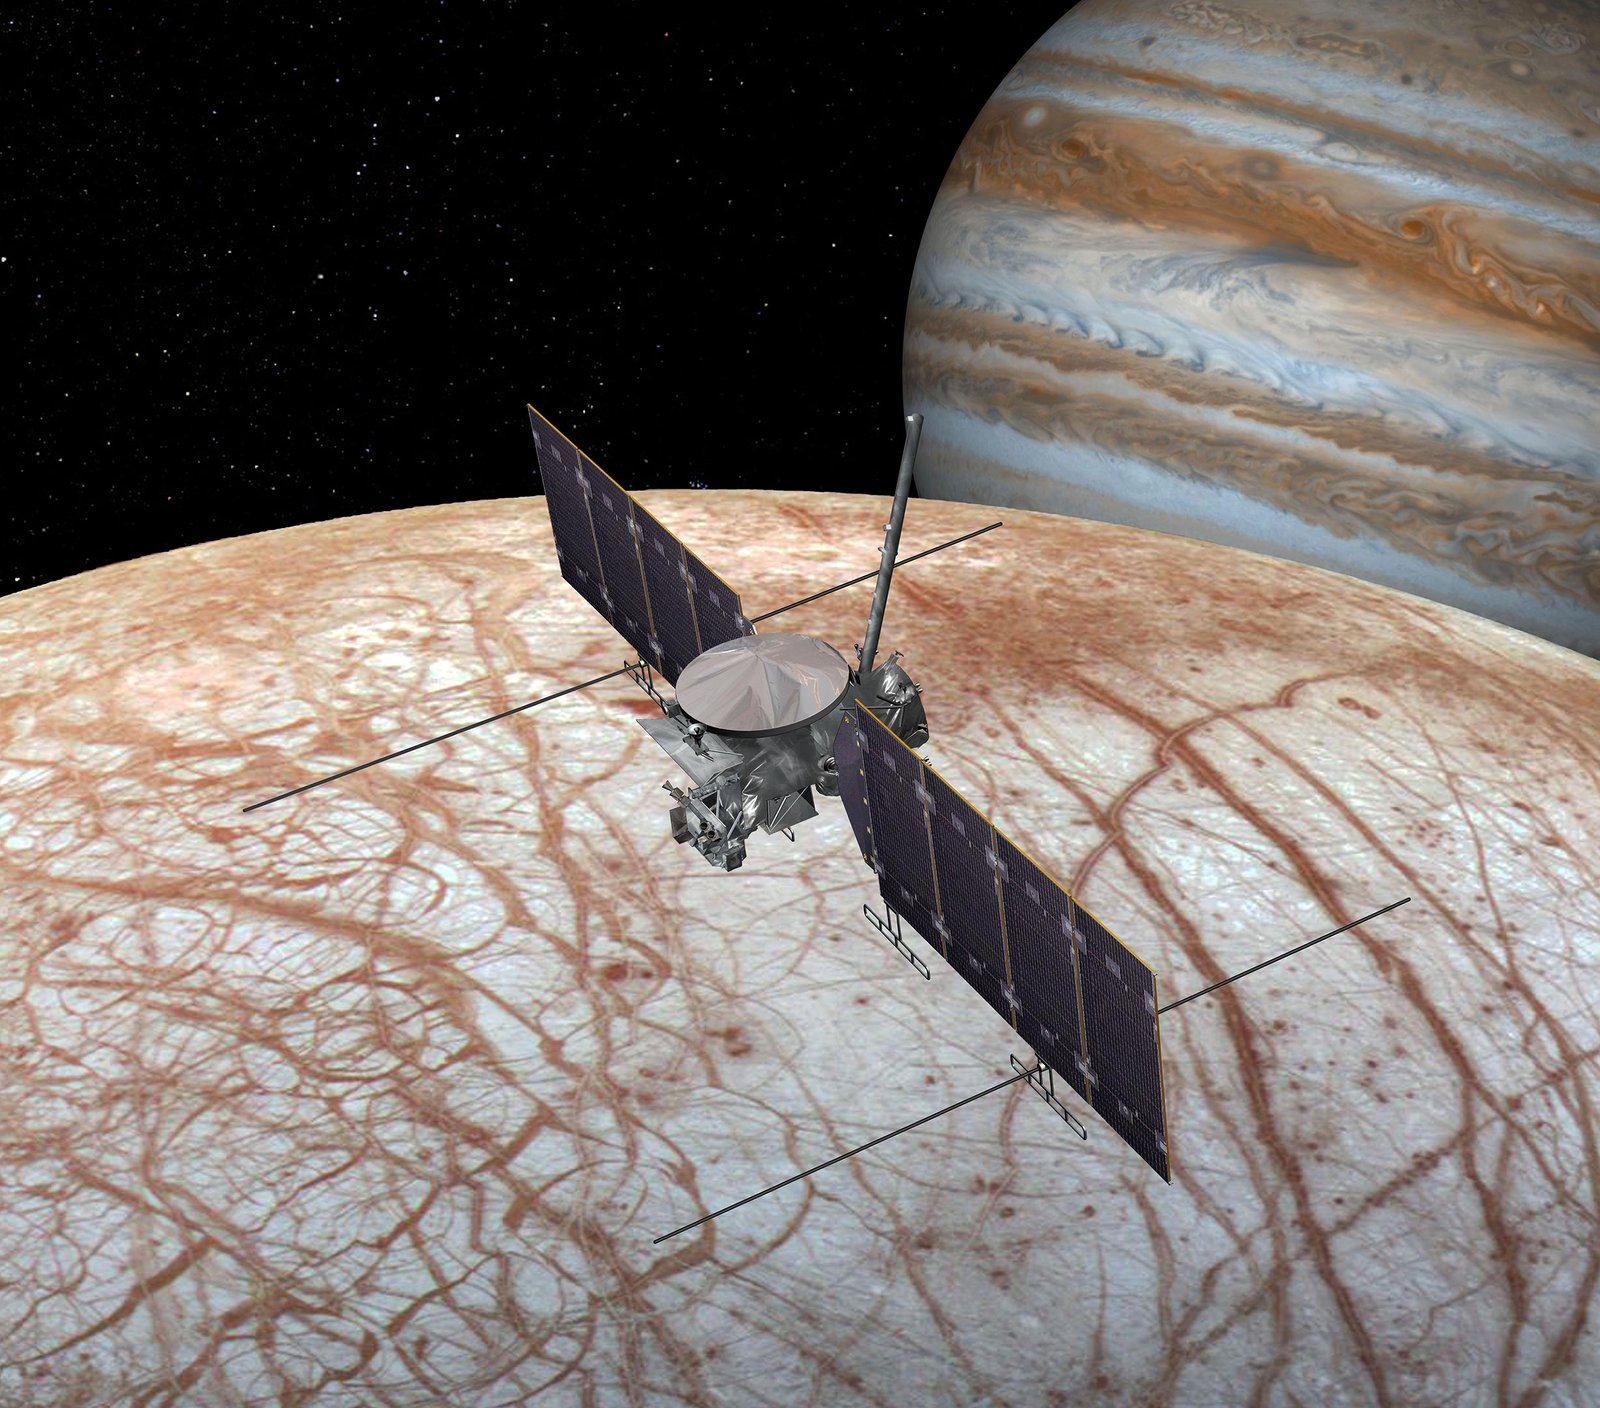 NASA Installs High Gain Antenna for Mission to Study Icy Moon of Jupiter